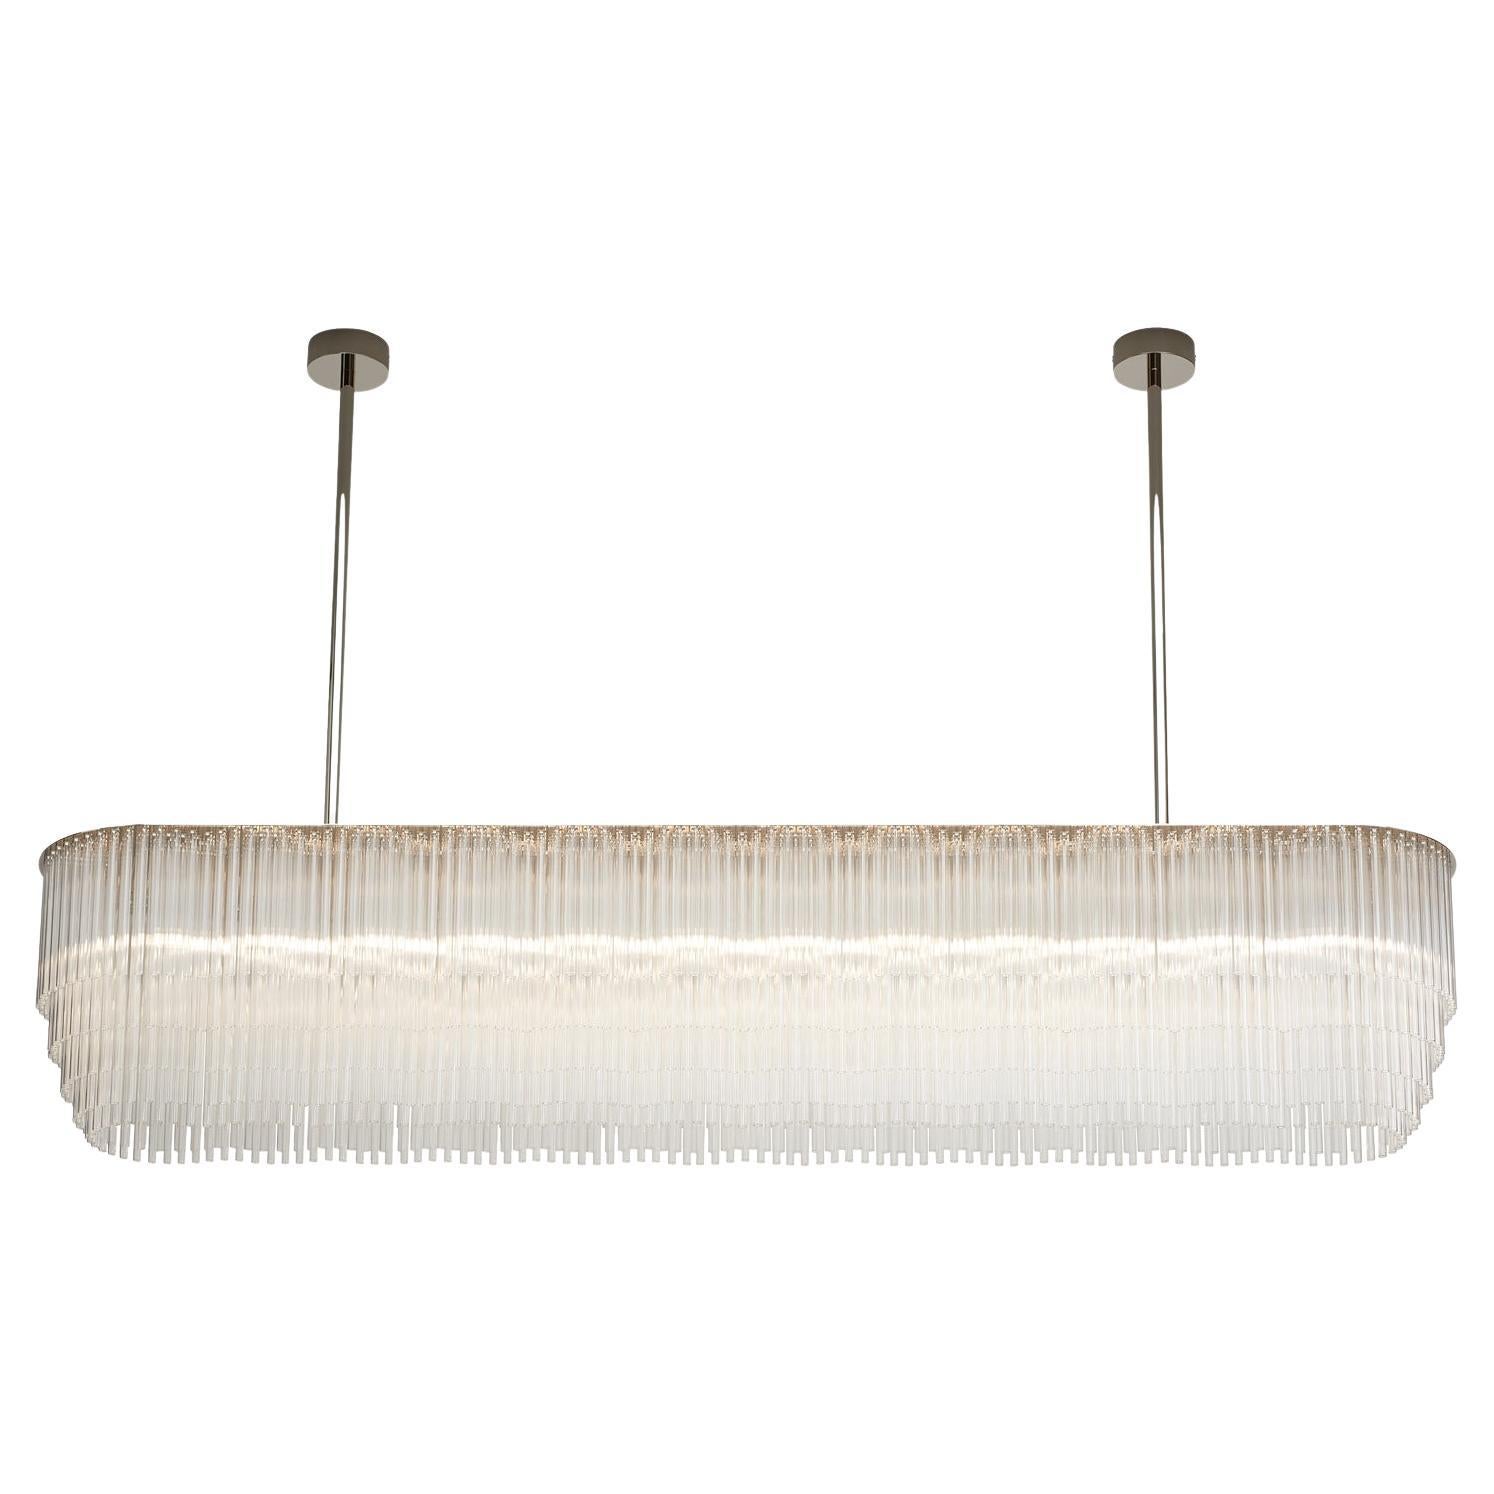 Linear Chandelier 1697mm / 66.75" in Polished Nickel with Tiered Glass Profile